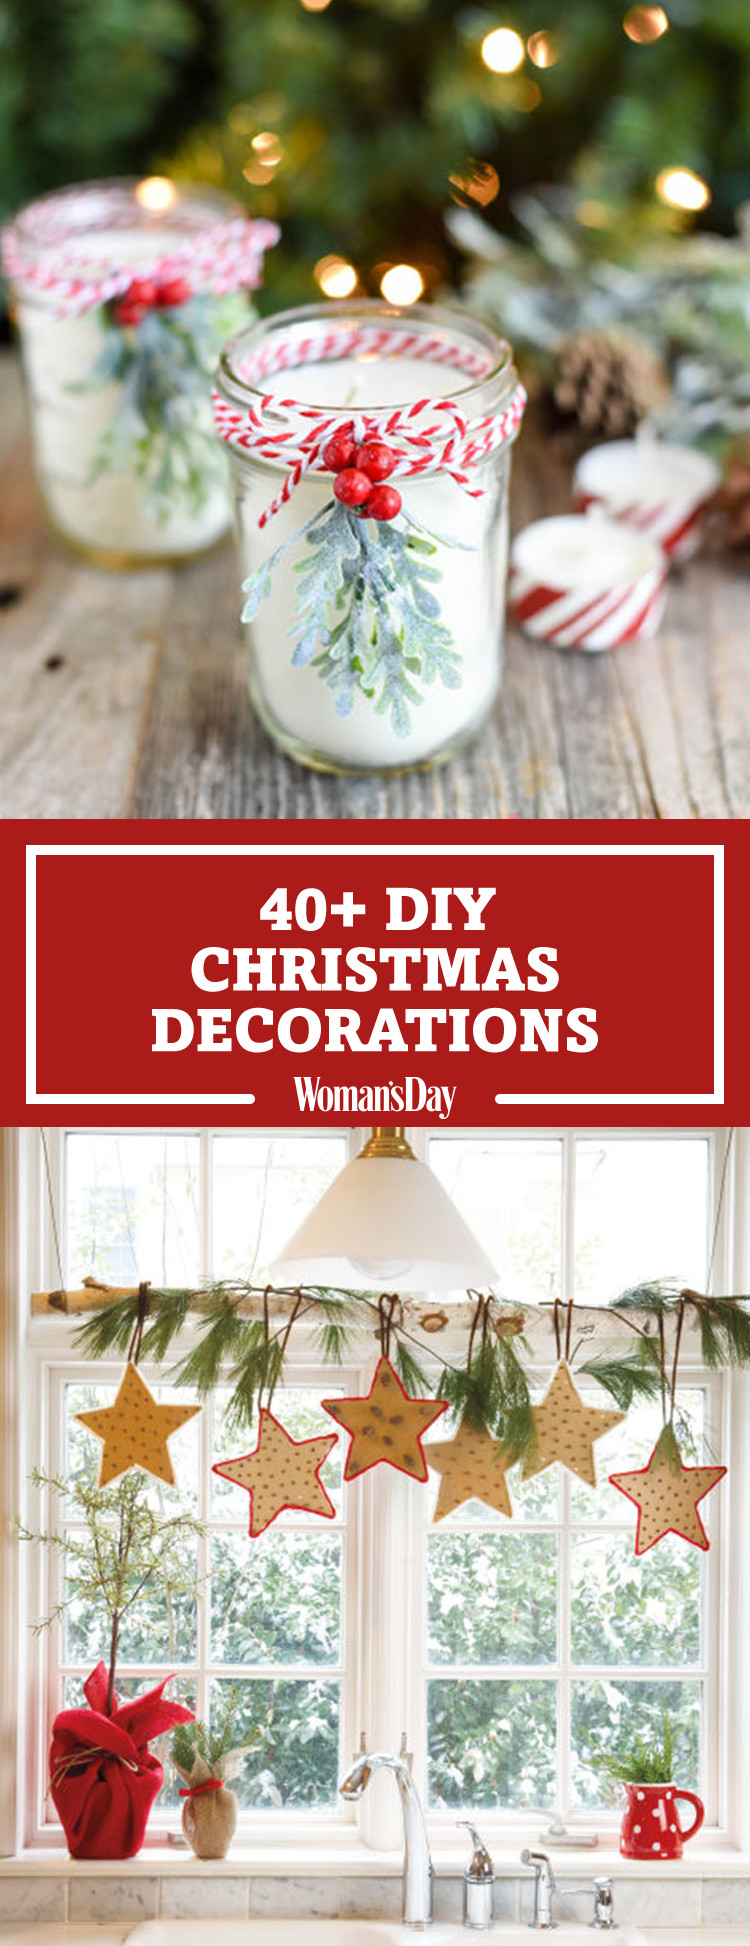 Christmas DIY Projects
 47 Easy DIY Christmas Decorations Homemade Ideas for